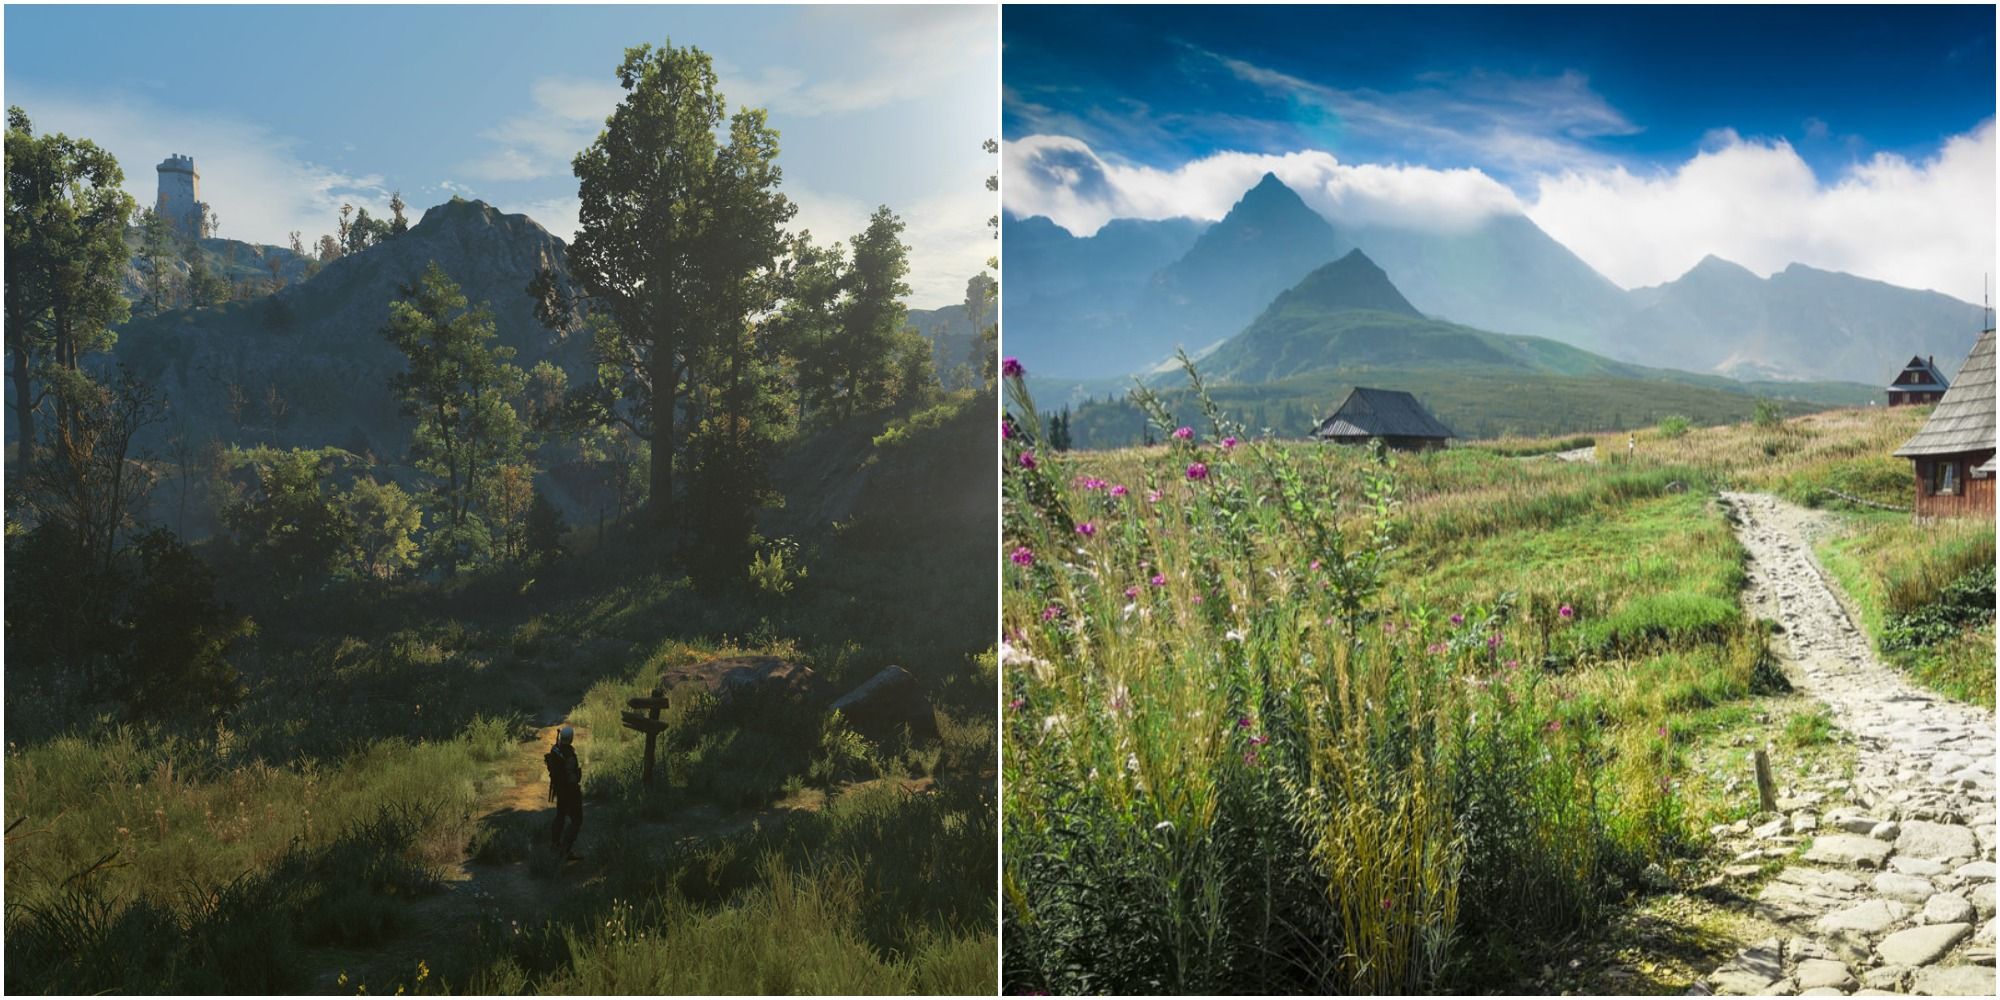 Two contrasting shots showing simialr landscapes in Velen and Poland